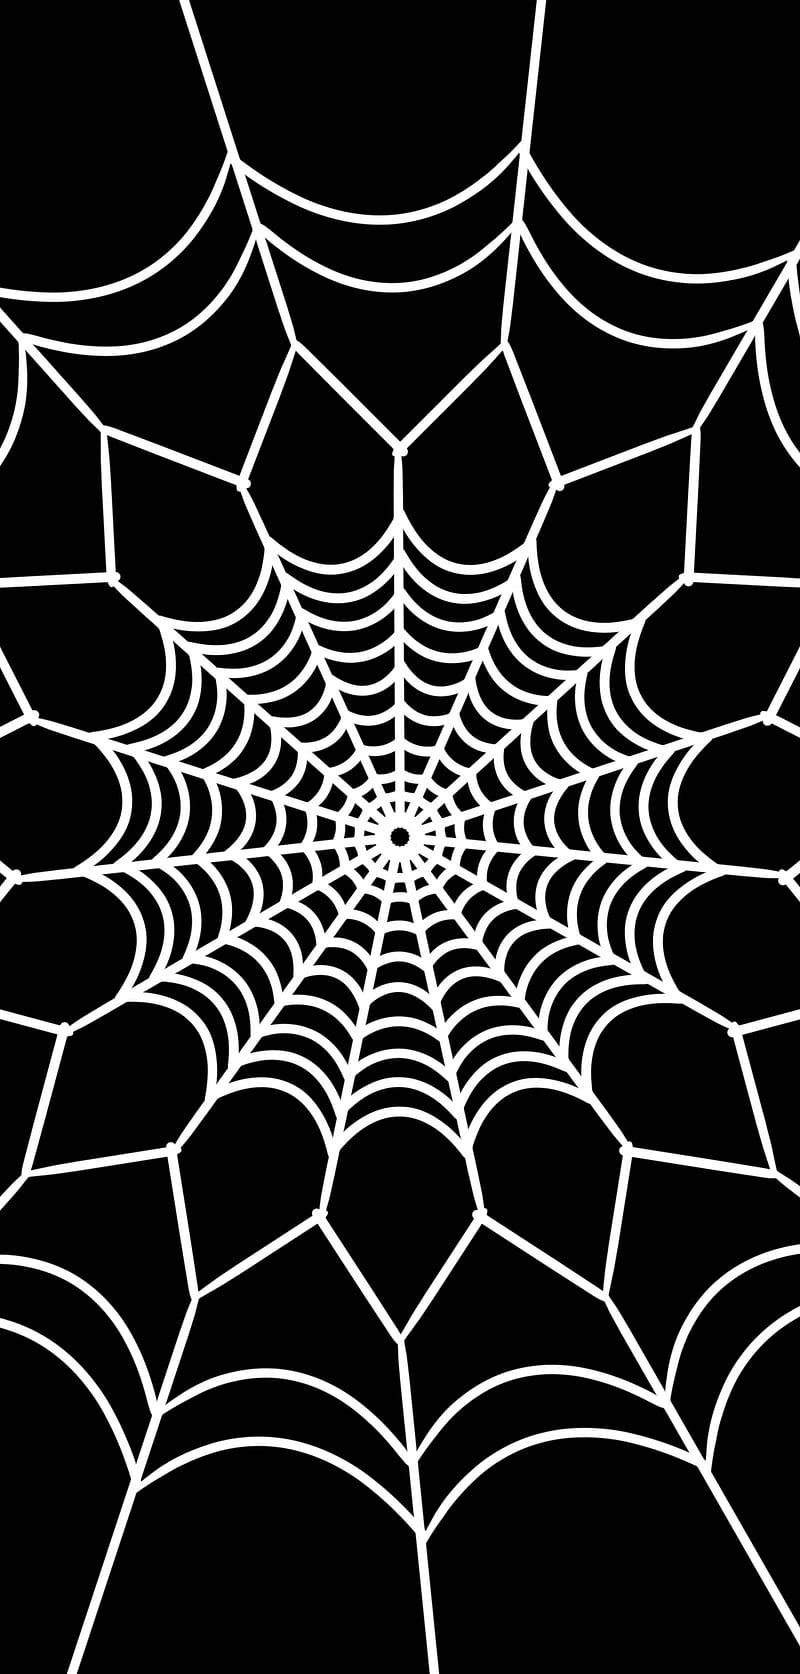 Spider Web, allthethingsidoarecool, black and white, cool, i never know, idk, looks like a flower, HD phone wallpaper